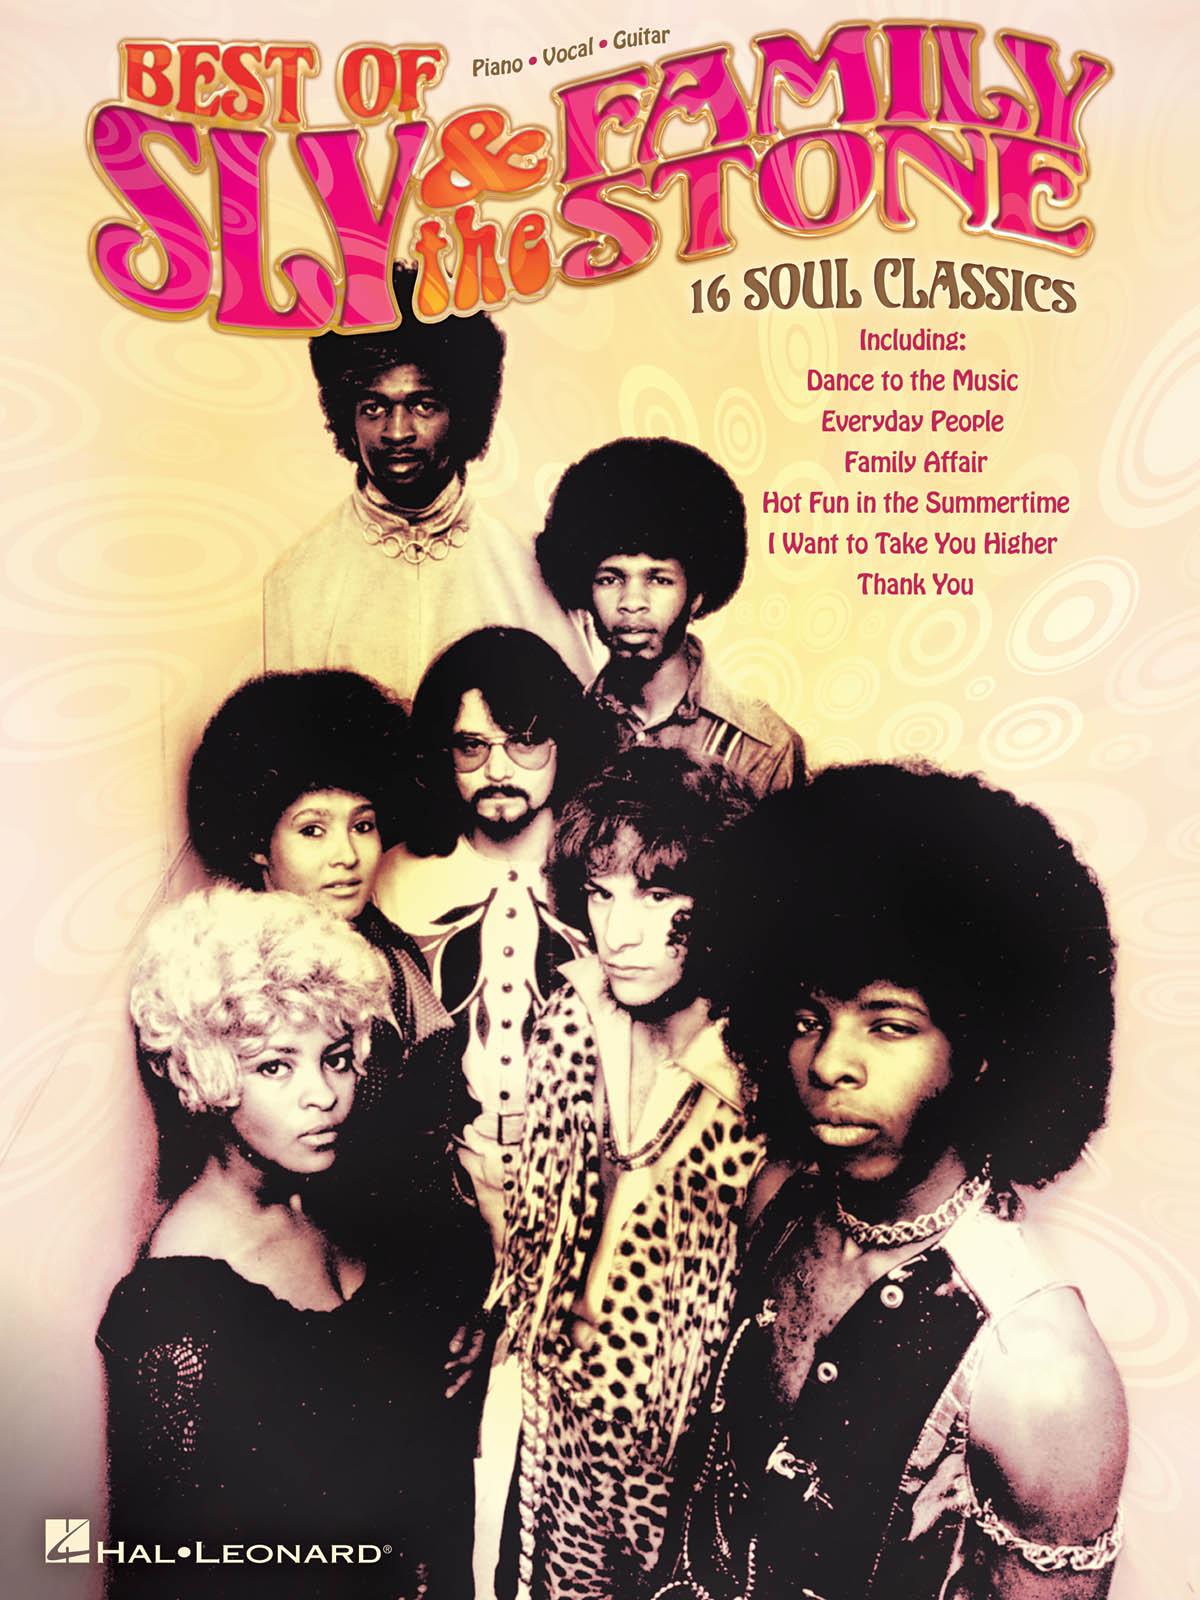 Sly and the Family Stone: Best Of Sly & The Family Stone: 16 Soul Classics: